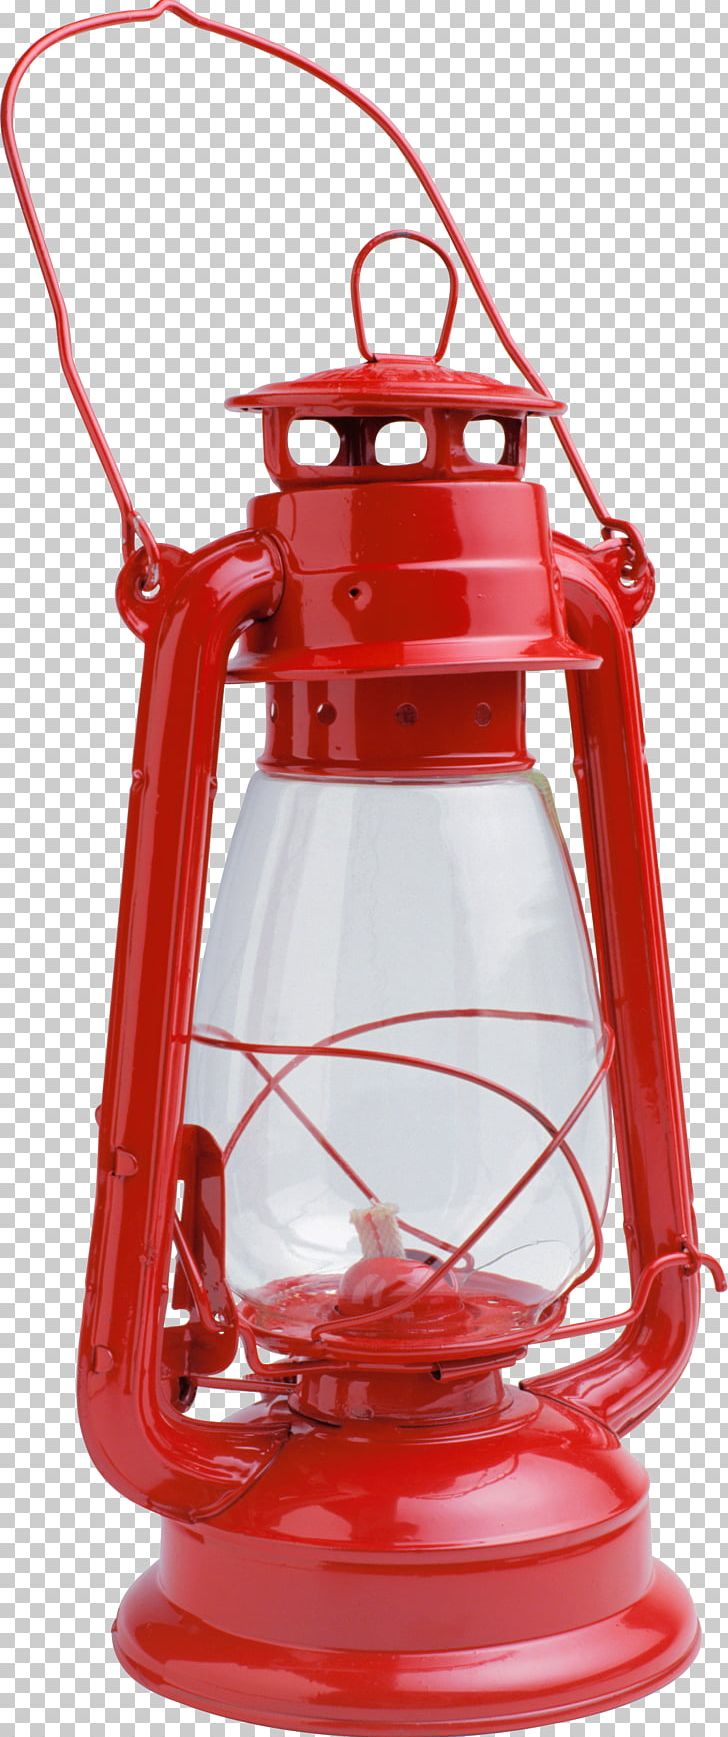 Candle Lantern Kerosene Lamp PNG, Clipart, Candle, Computer Icons, Computer Software, Electric Light, Fire Hydrant Free PNG Download